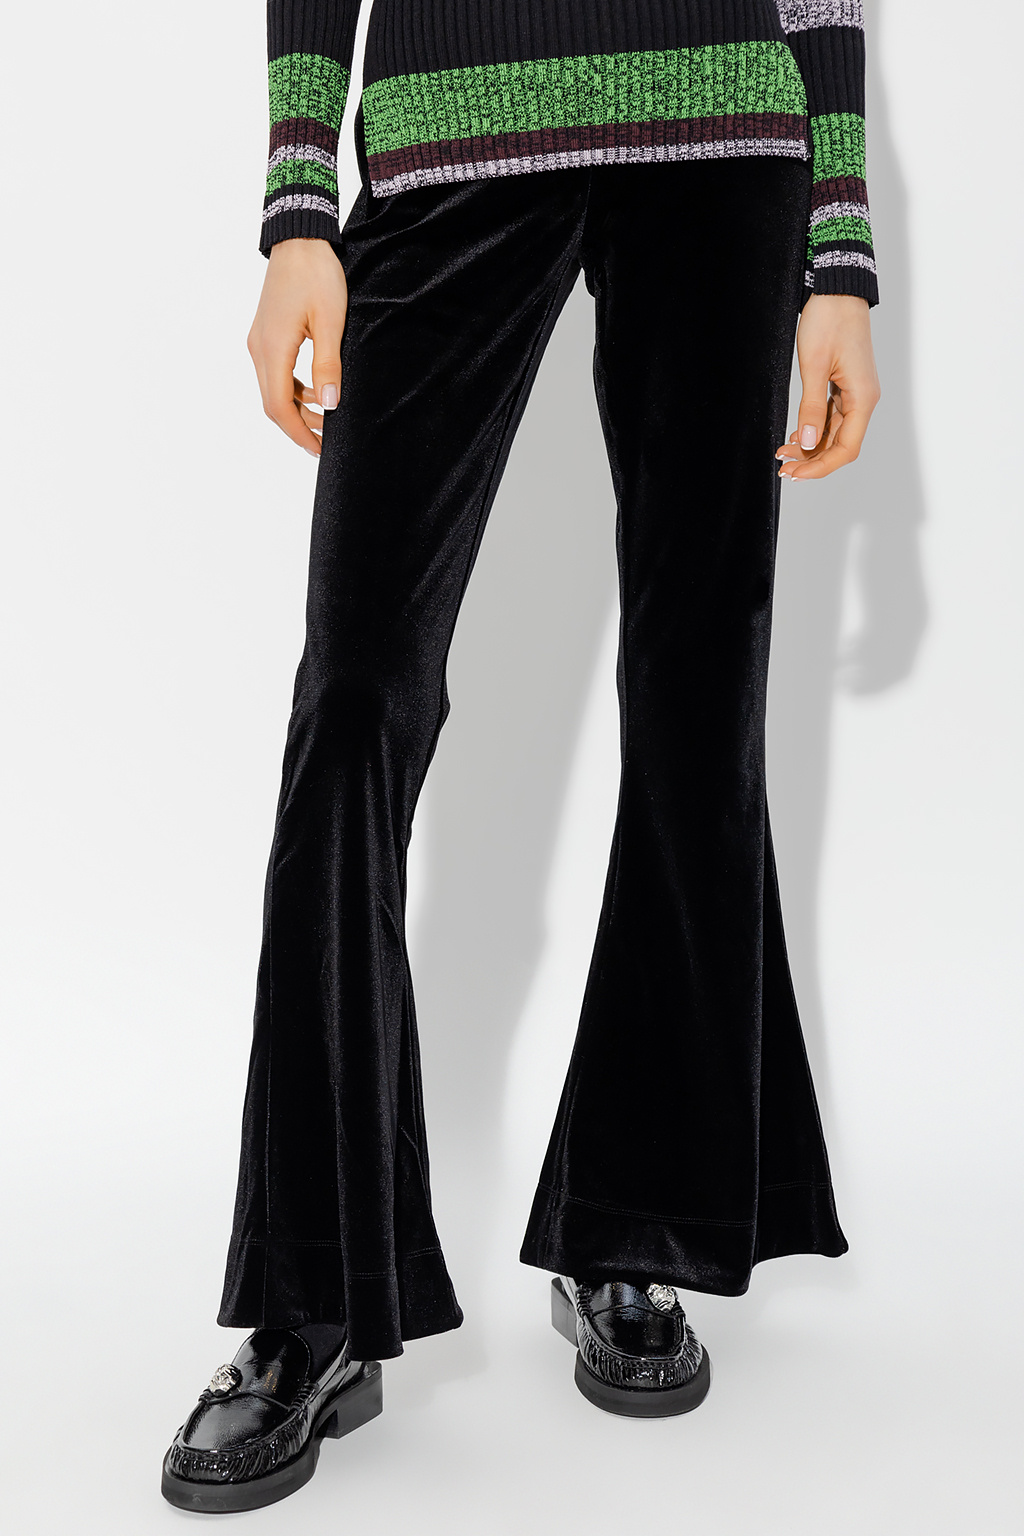 Ganni Velour trousers | Clothing |